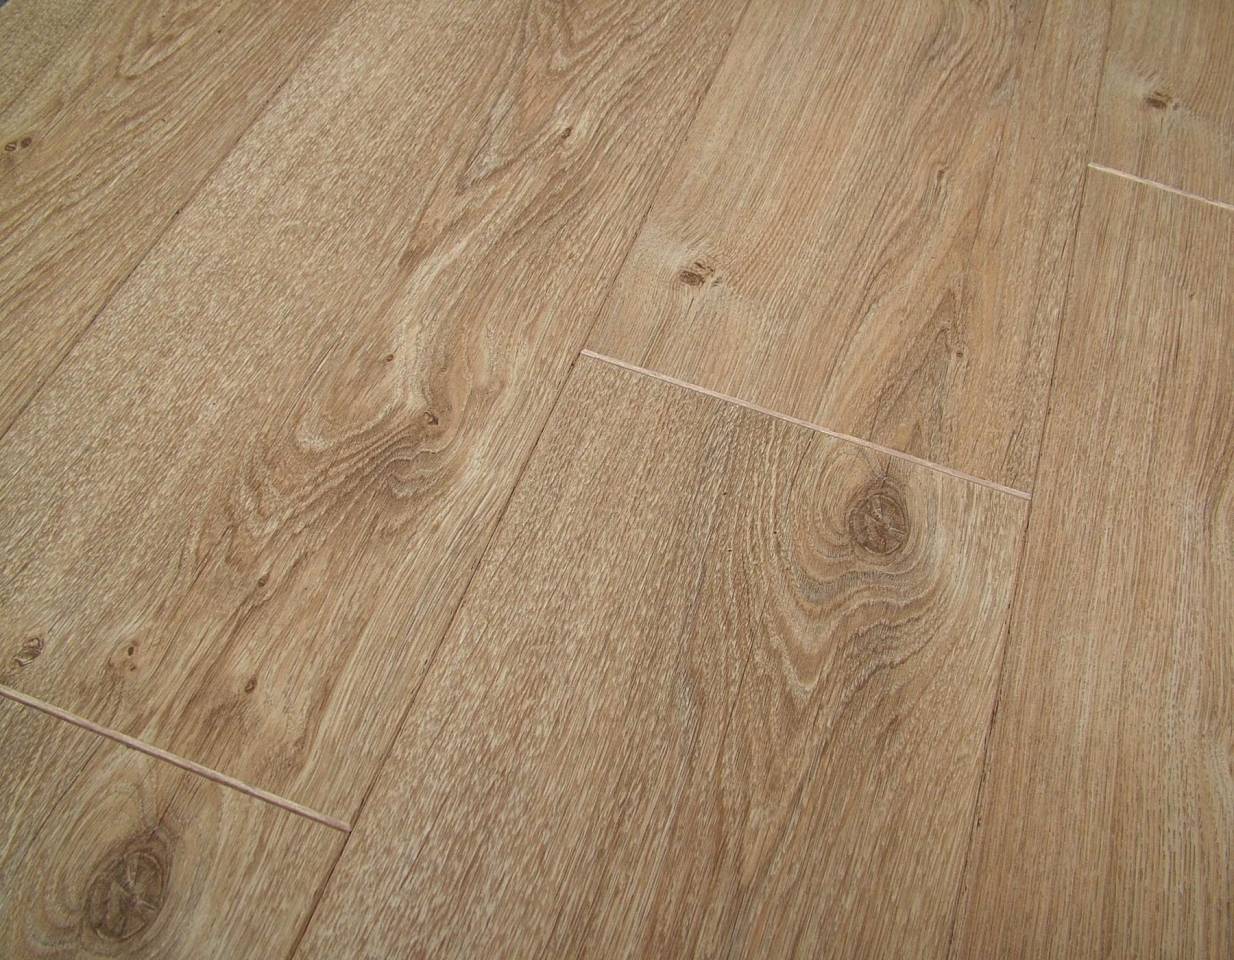 Lifestyle Chelsea Traditional Oak flooring by Balterio